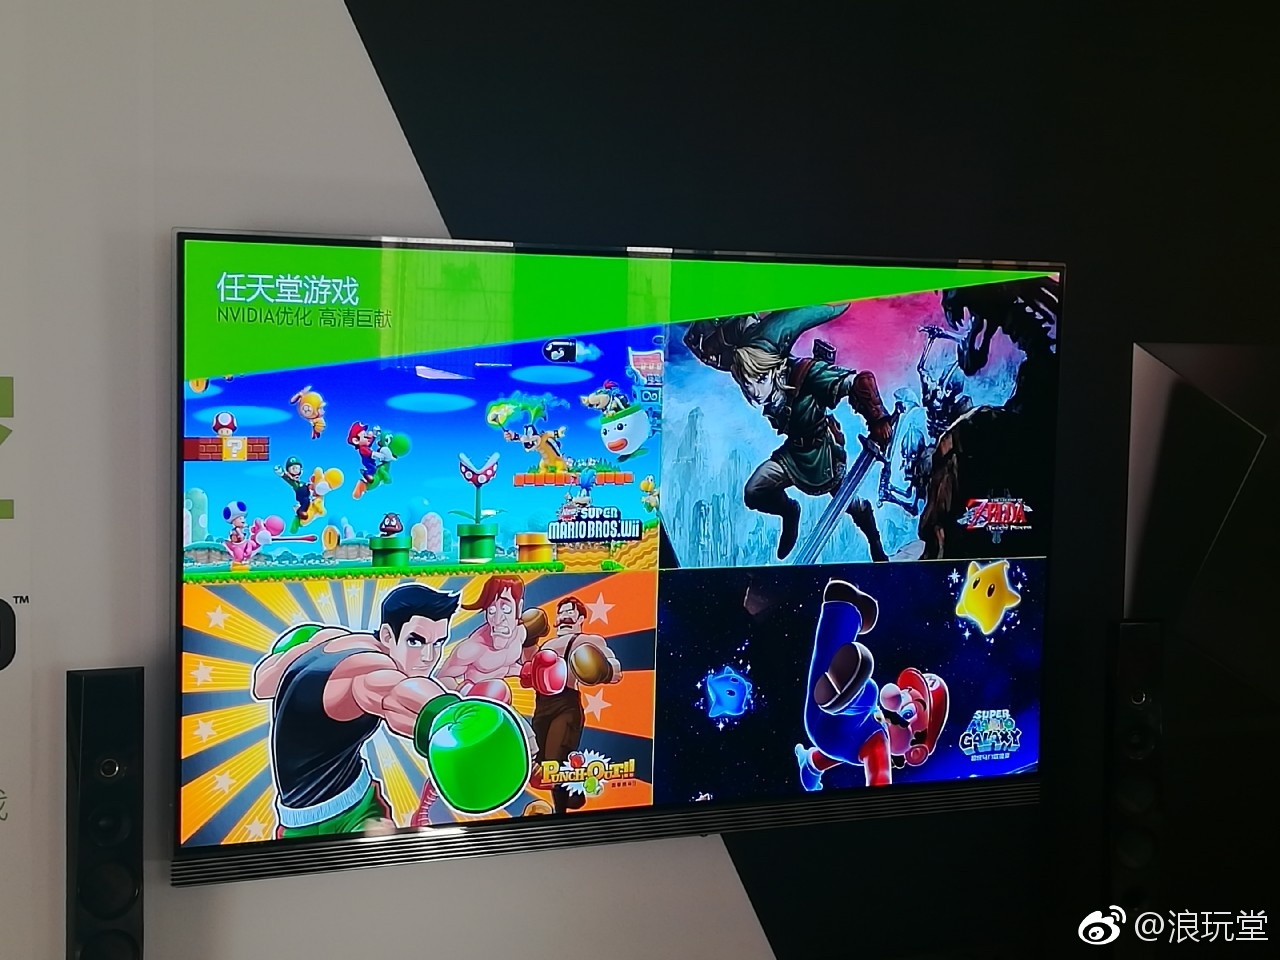 nvidia shield wii games